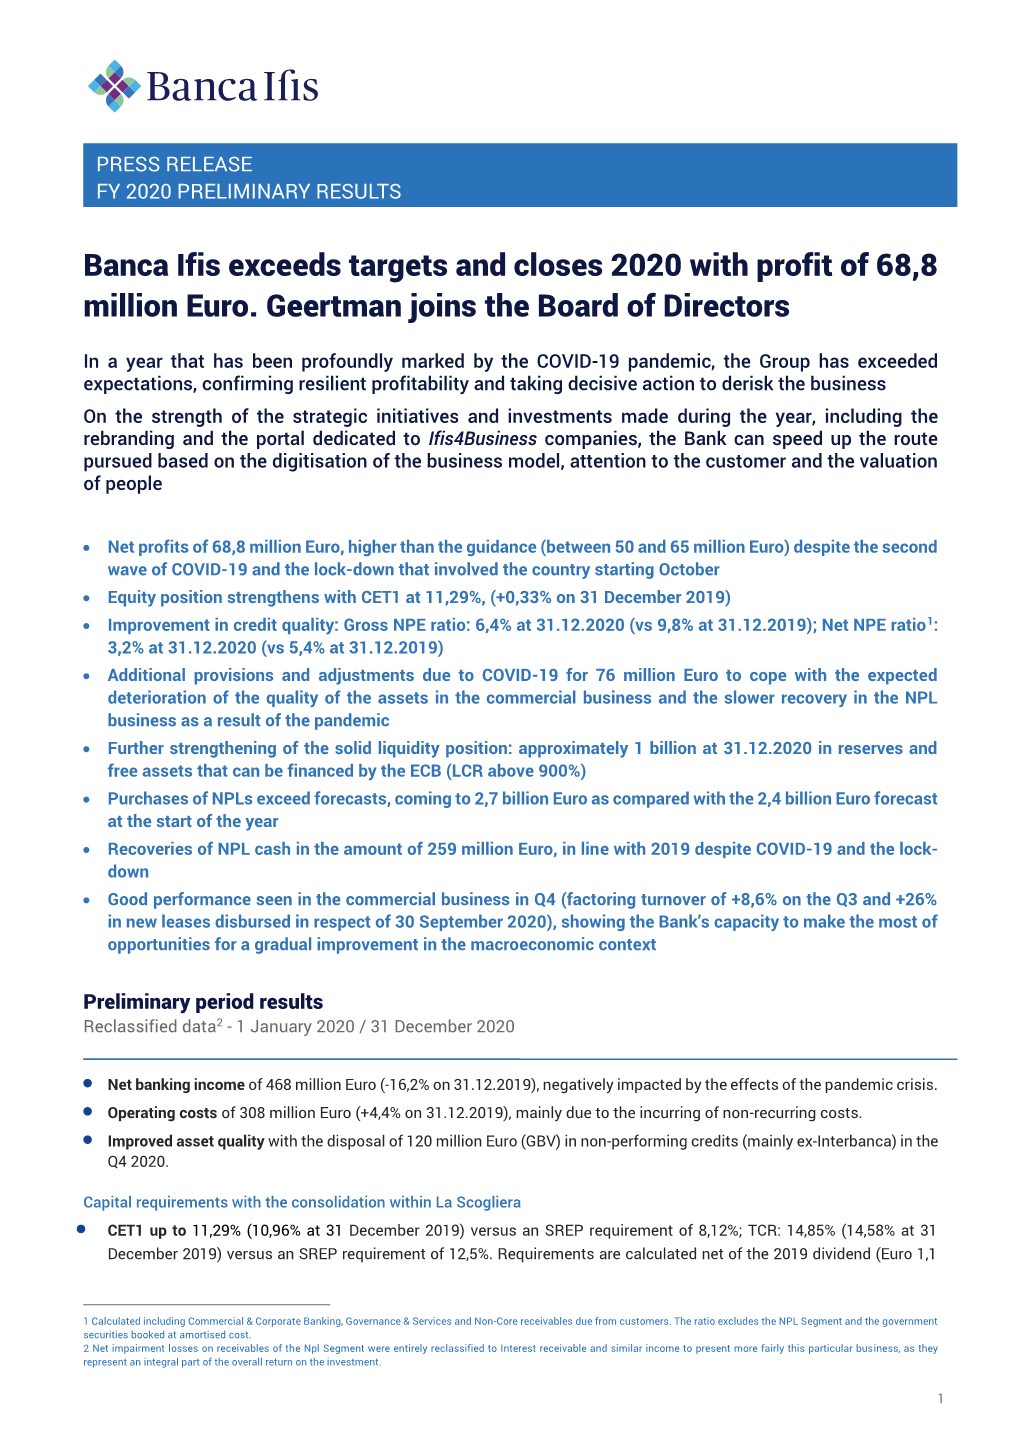 Banca Ifis Exceeds Targets and Closes 2020 with Profit of 68,8 Million Euro